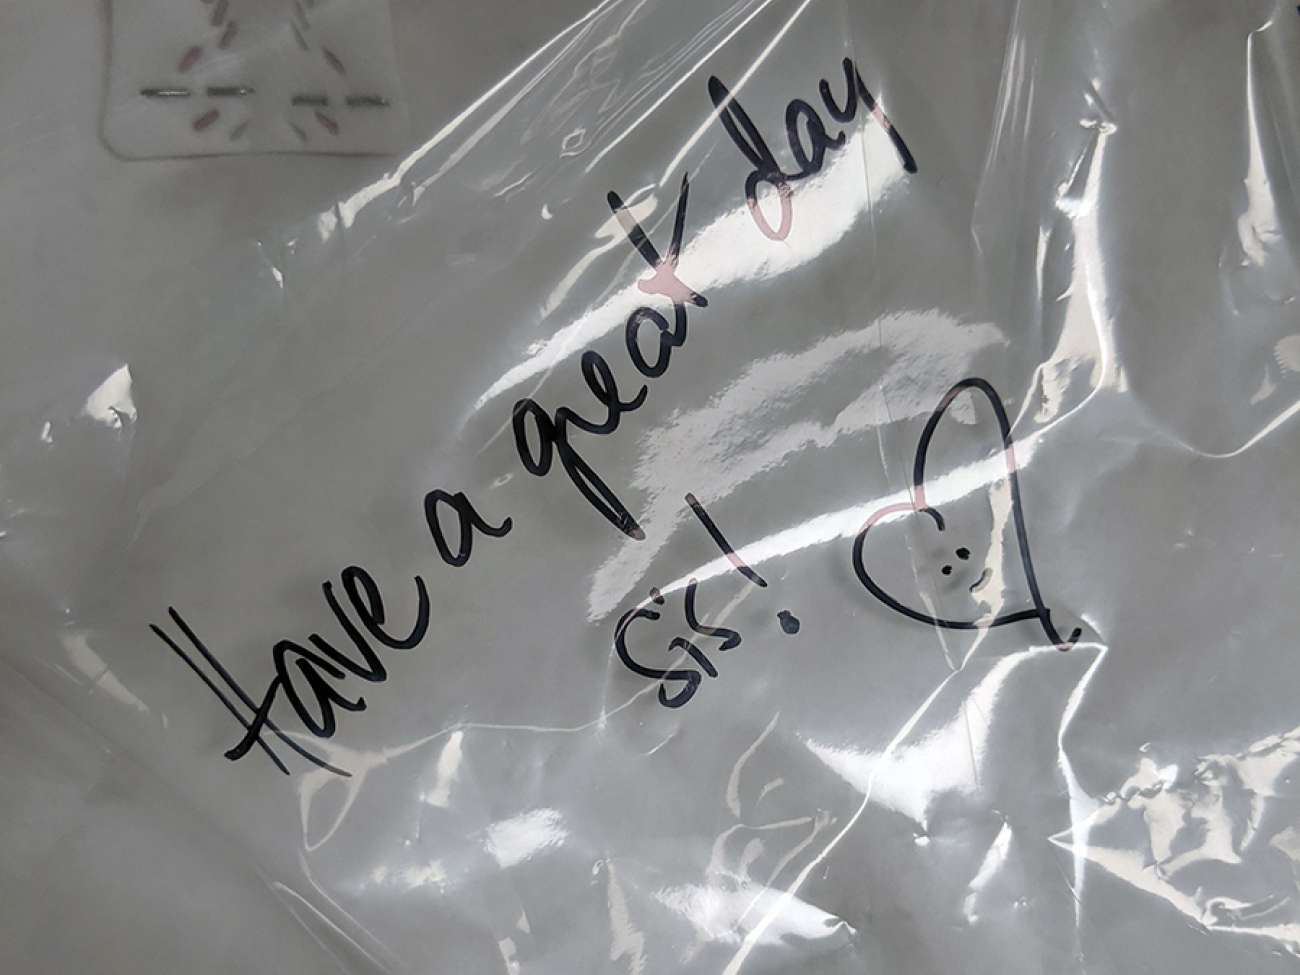 MDRD technicians have been writing short notes of encouragement on the packaging of reprocessed masks